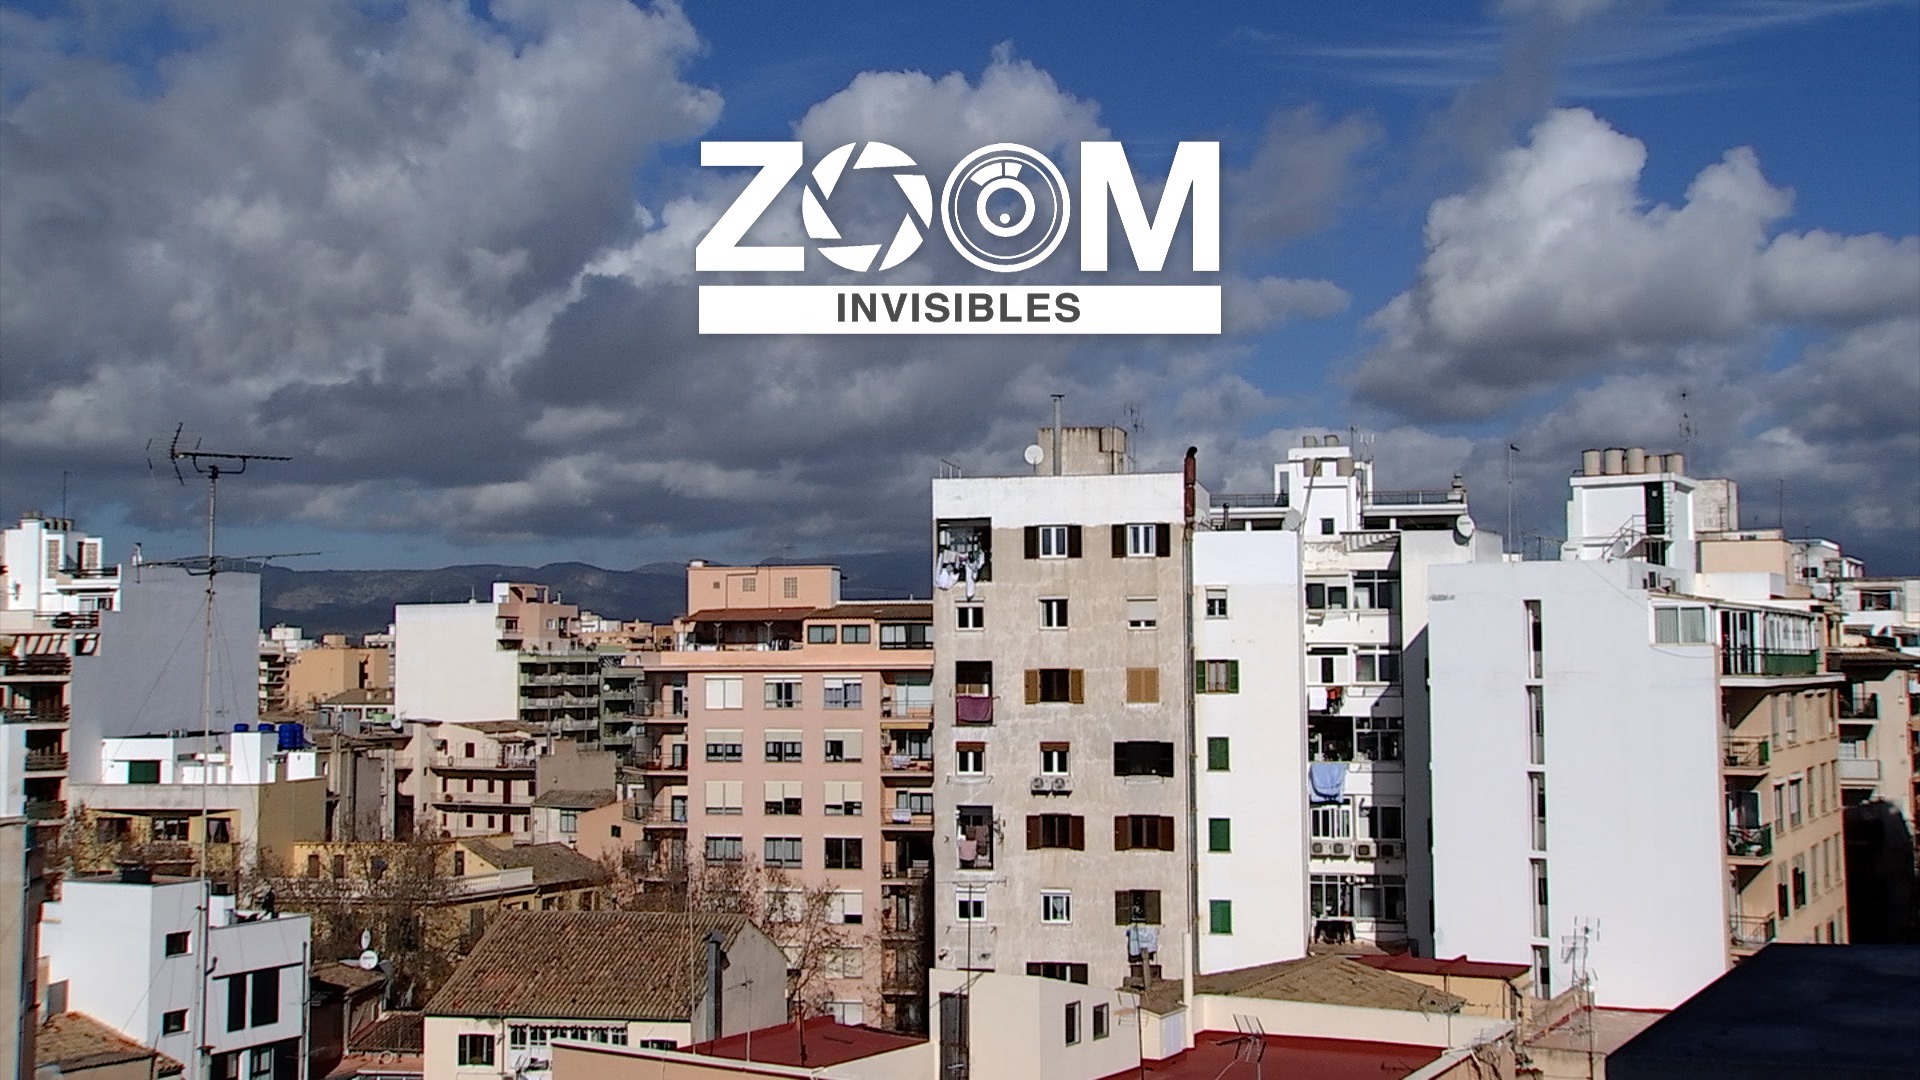 ZOOM%3A+Invisibles